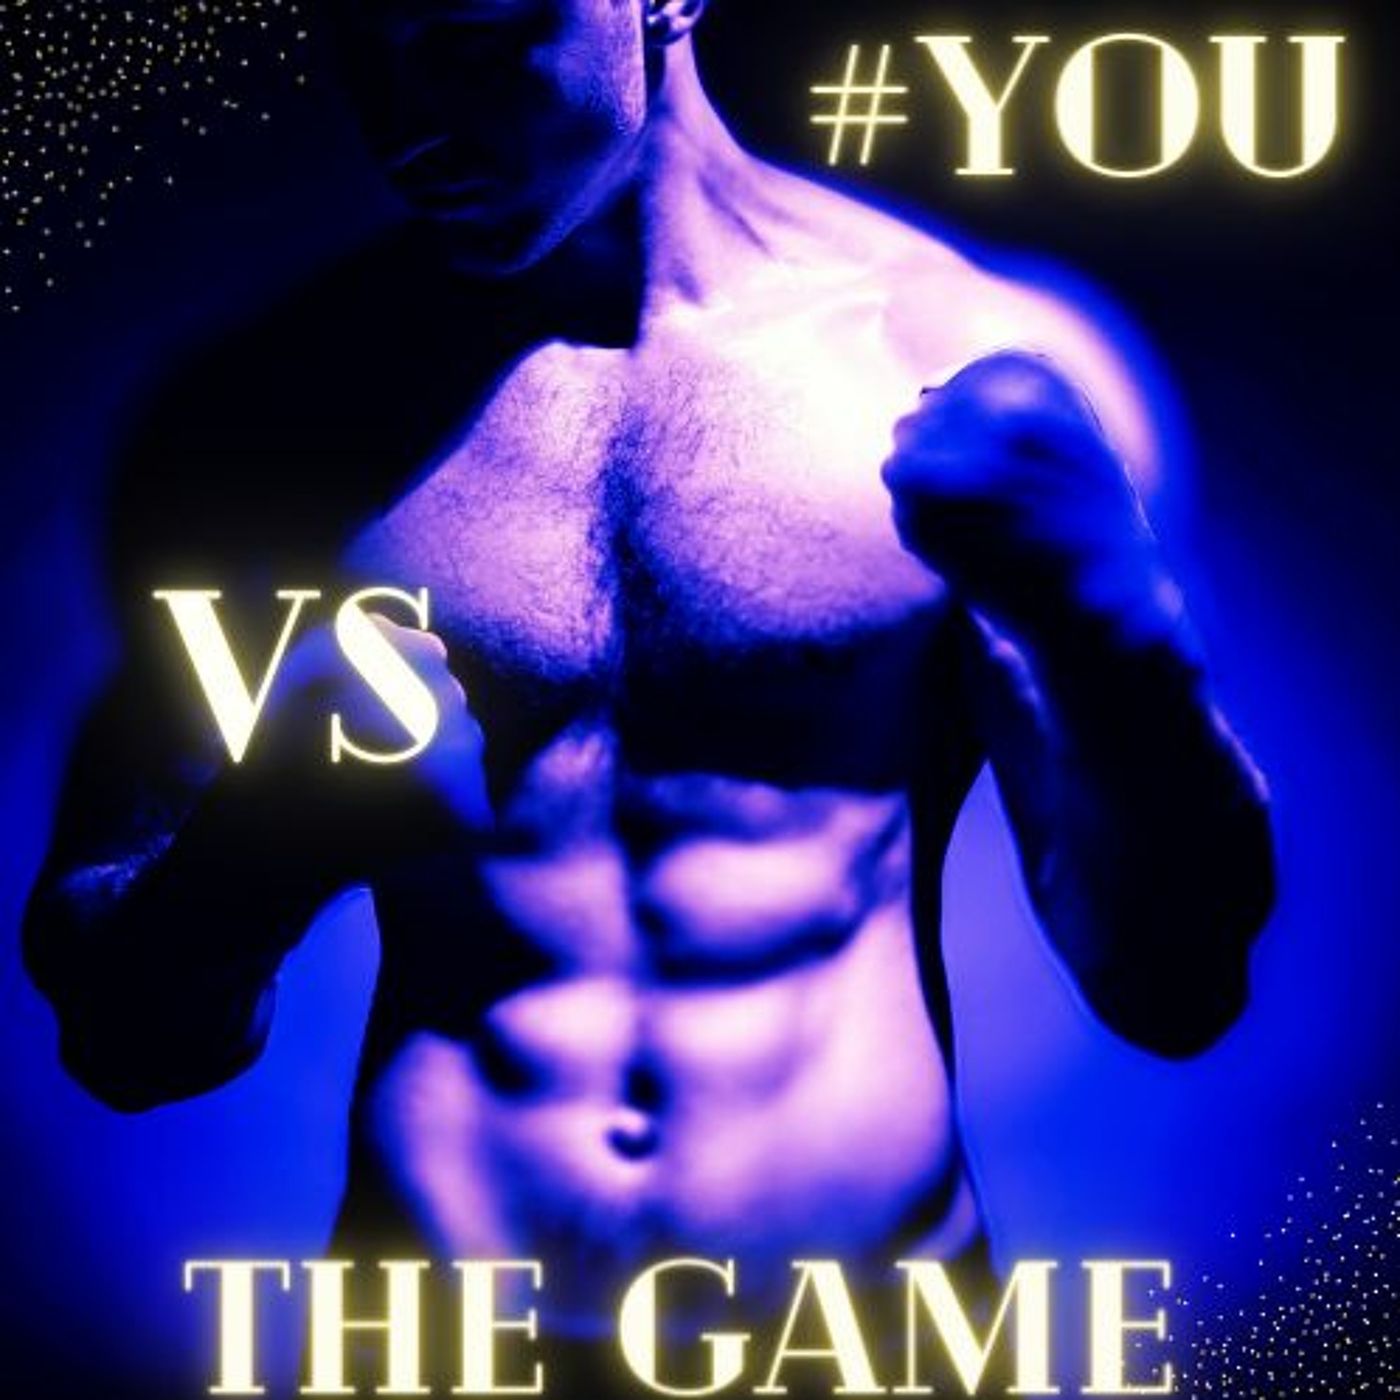 #YOU VS THE GAME!